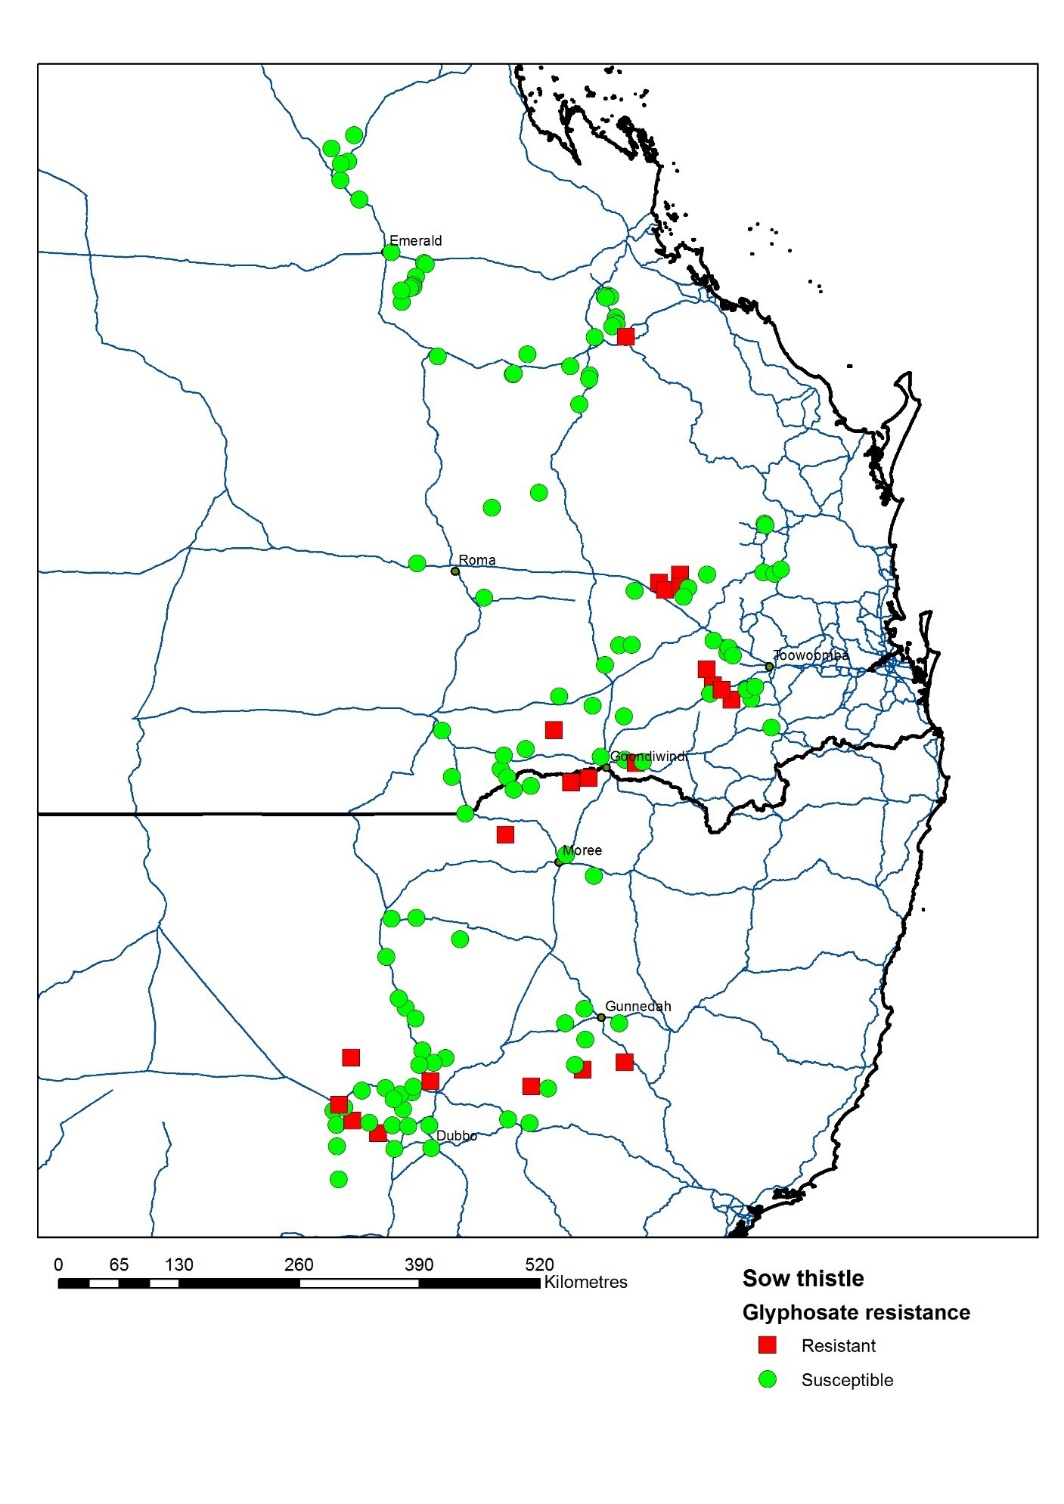 This map shows the distribution of glyphosate resistant and susceptible common sowthistle populations across the northern grain cropping region. Red squares represent resistant populations while green circles represent susceptible populations.